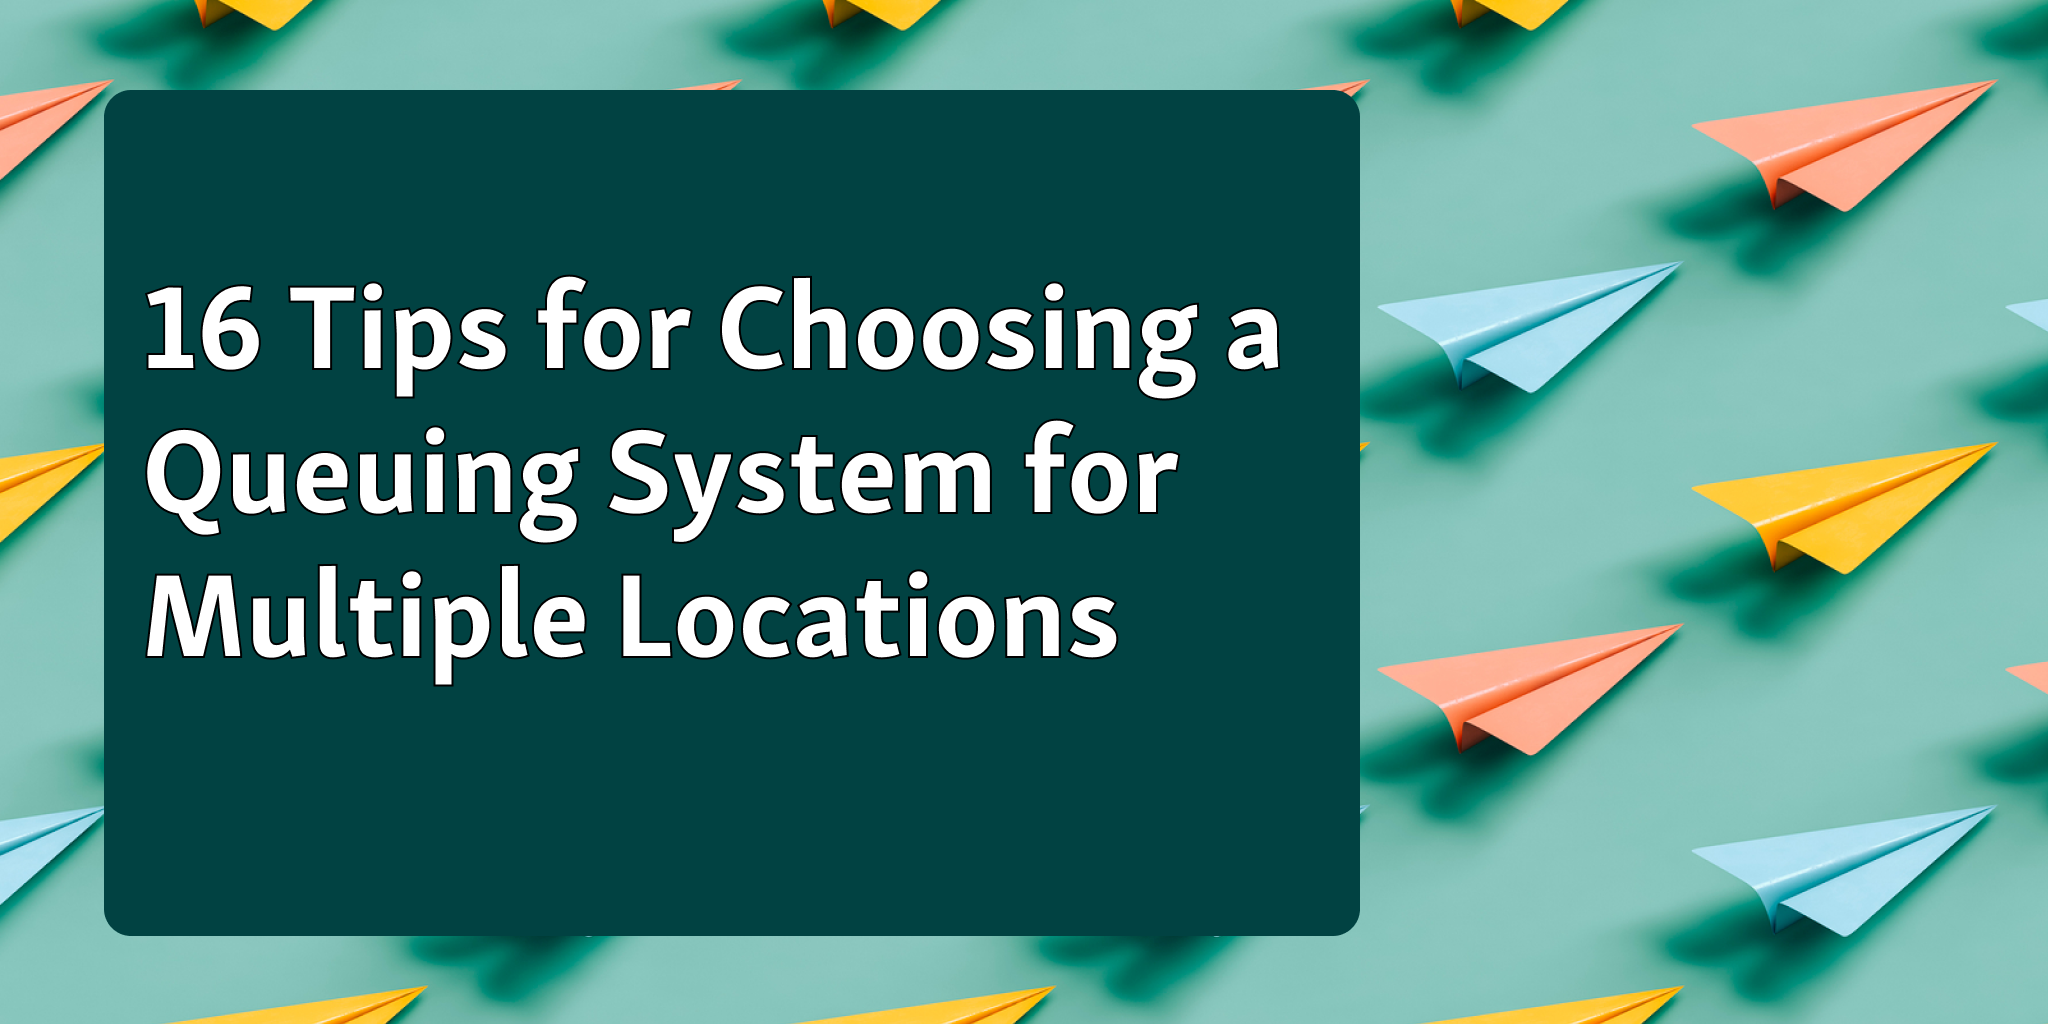 how to choose queue management system for multiple locations